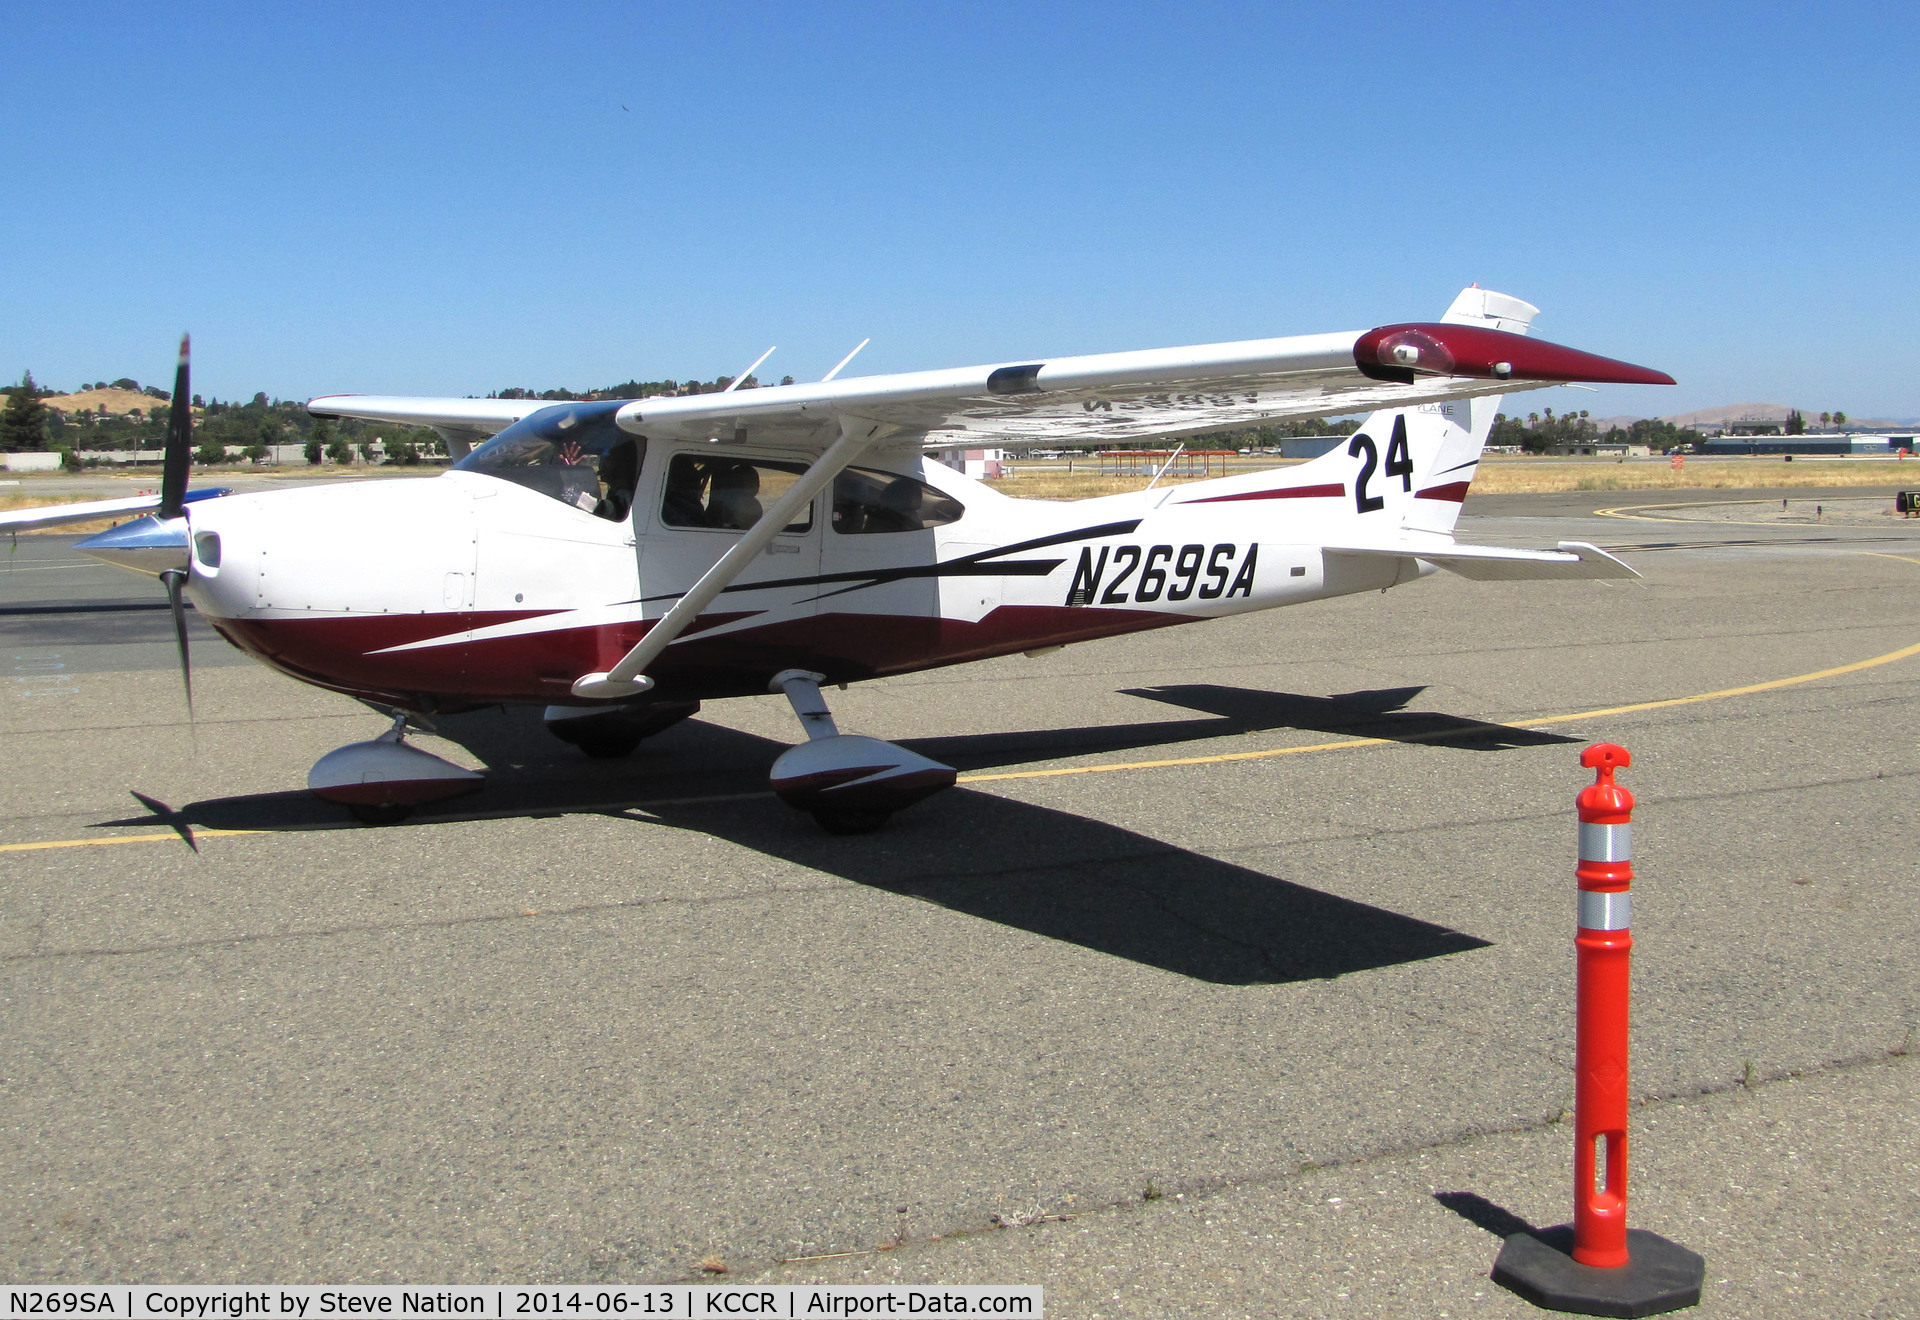 N269SA, Cessna 182T Skylane C/N 18282280, Florida-based 2011 Cessna 182T Skylane took part in 2014 Air Classic Race as Race #24. Photo @ Buchanan Field, Concord, CA on arrival prior to the 1st leg of the annual cross county event. Pilots were Susan and Marie Carastro.